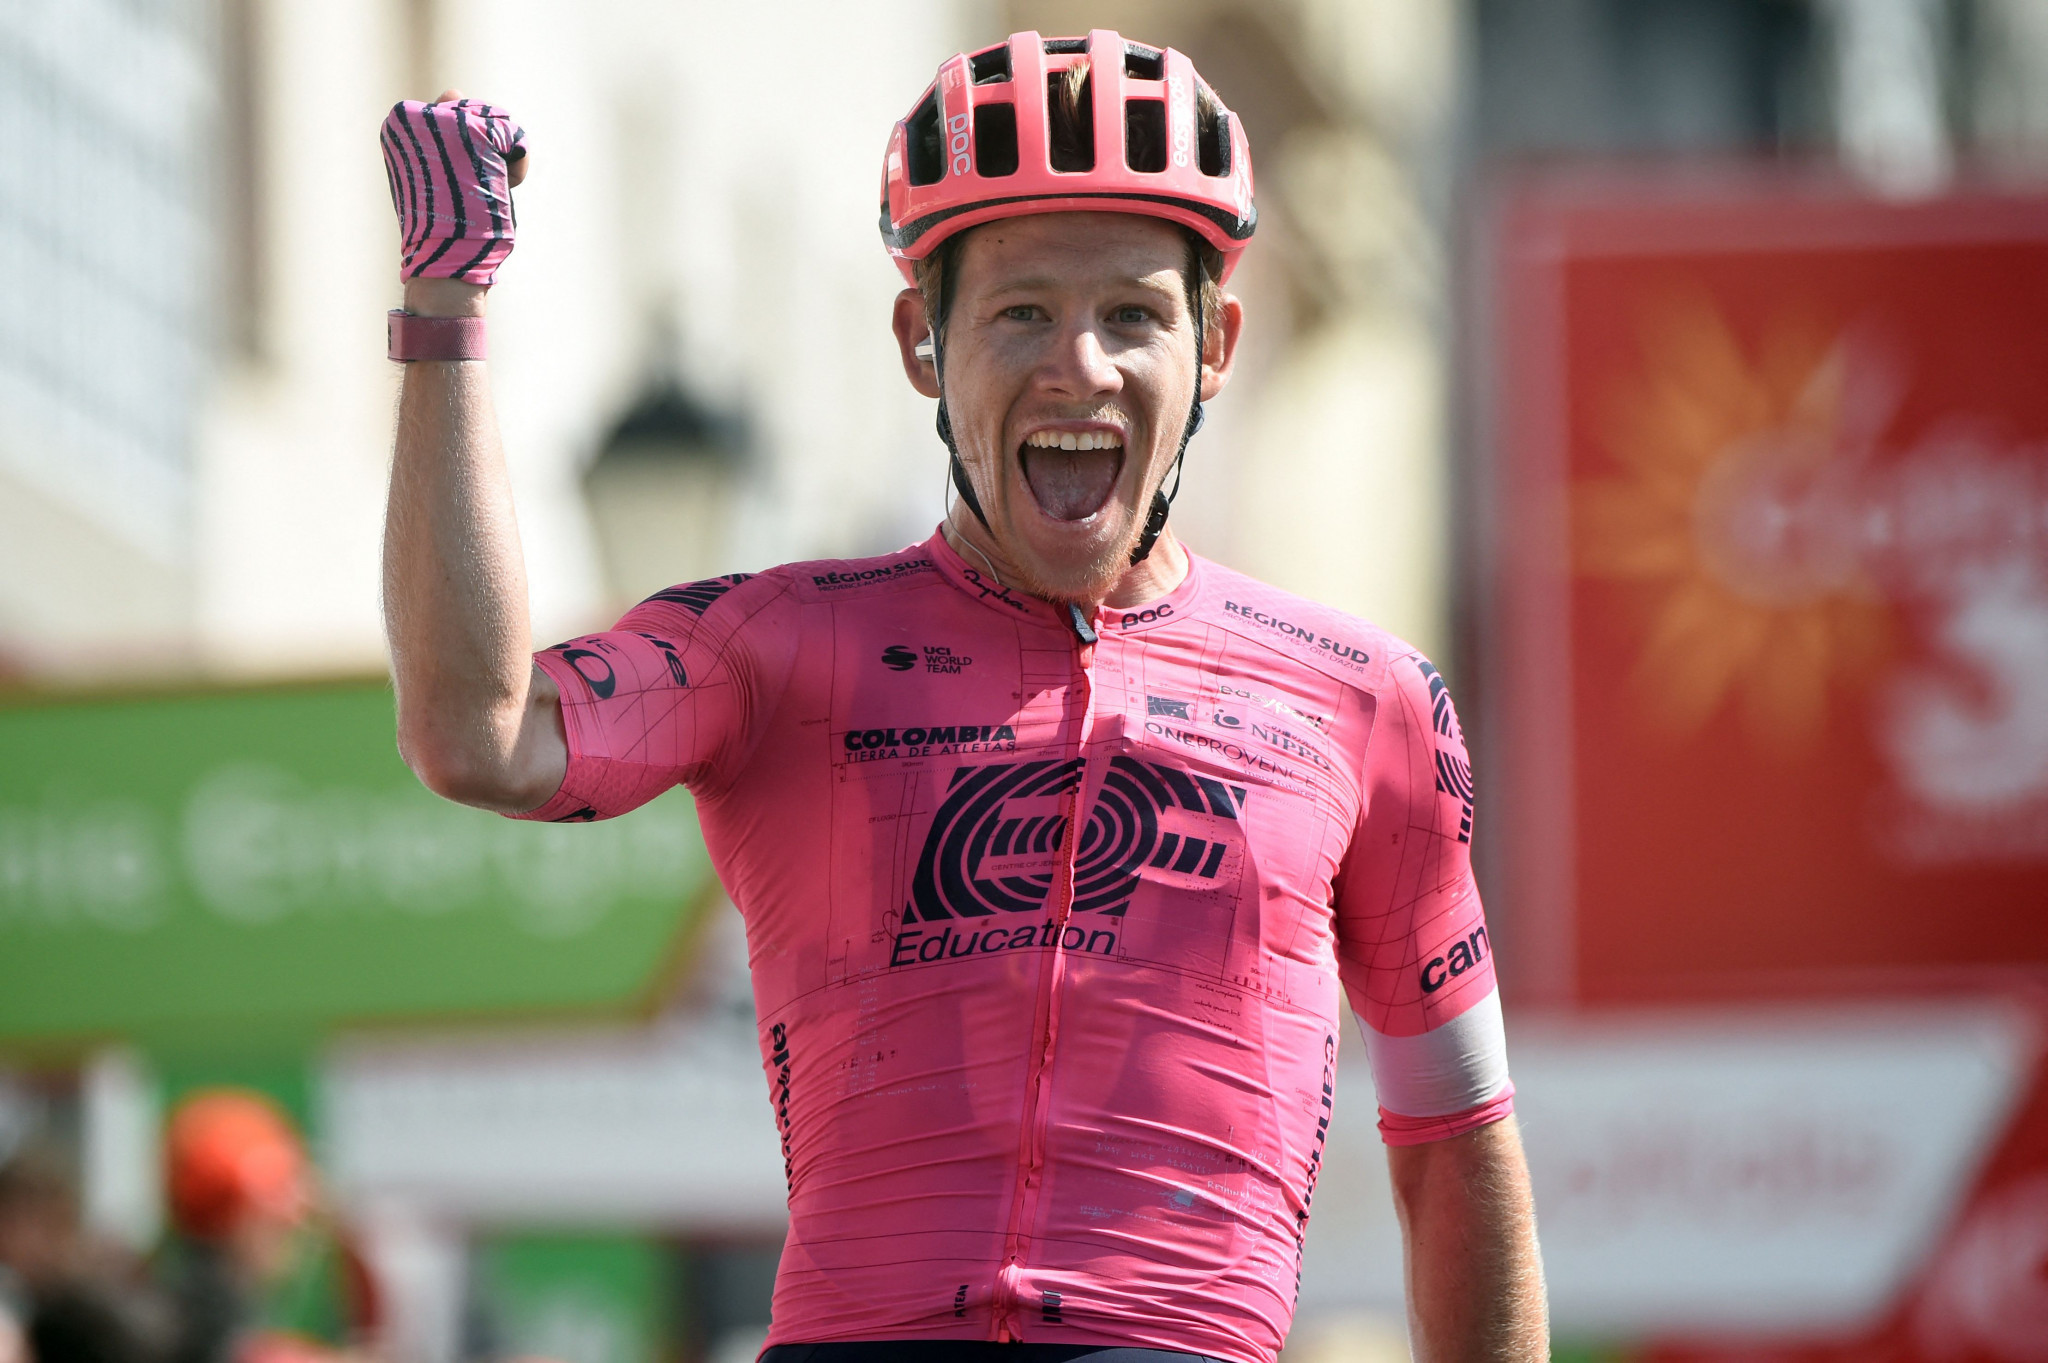 Cort takes Vuelta hat-trick as Roglič claims 50th Grand Tour leader's jersey